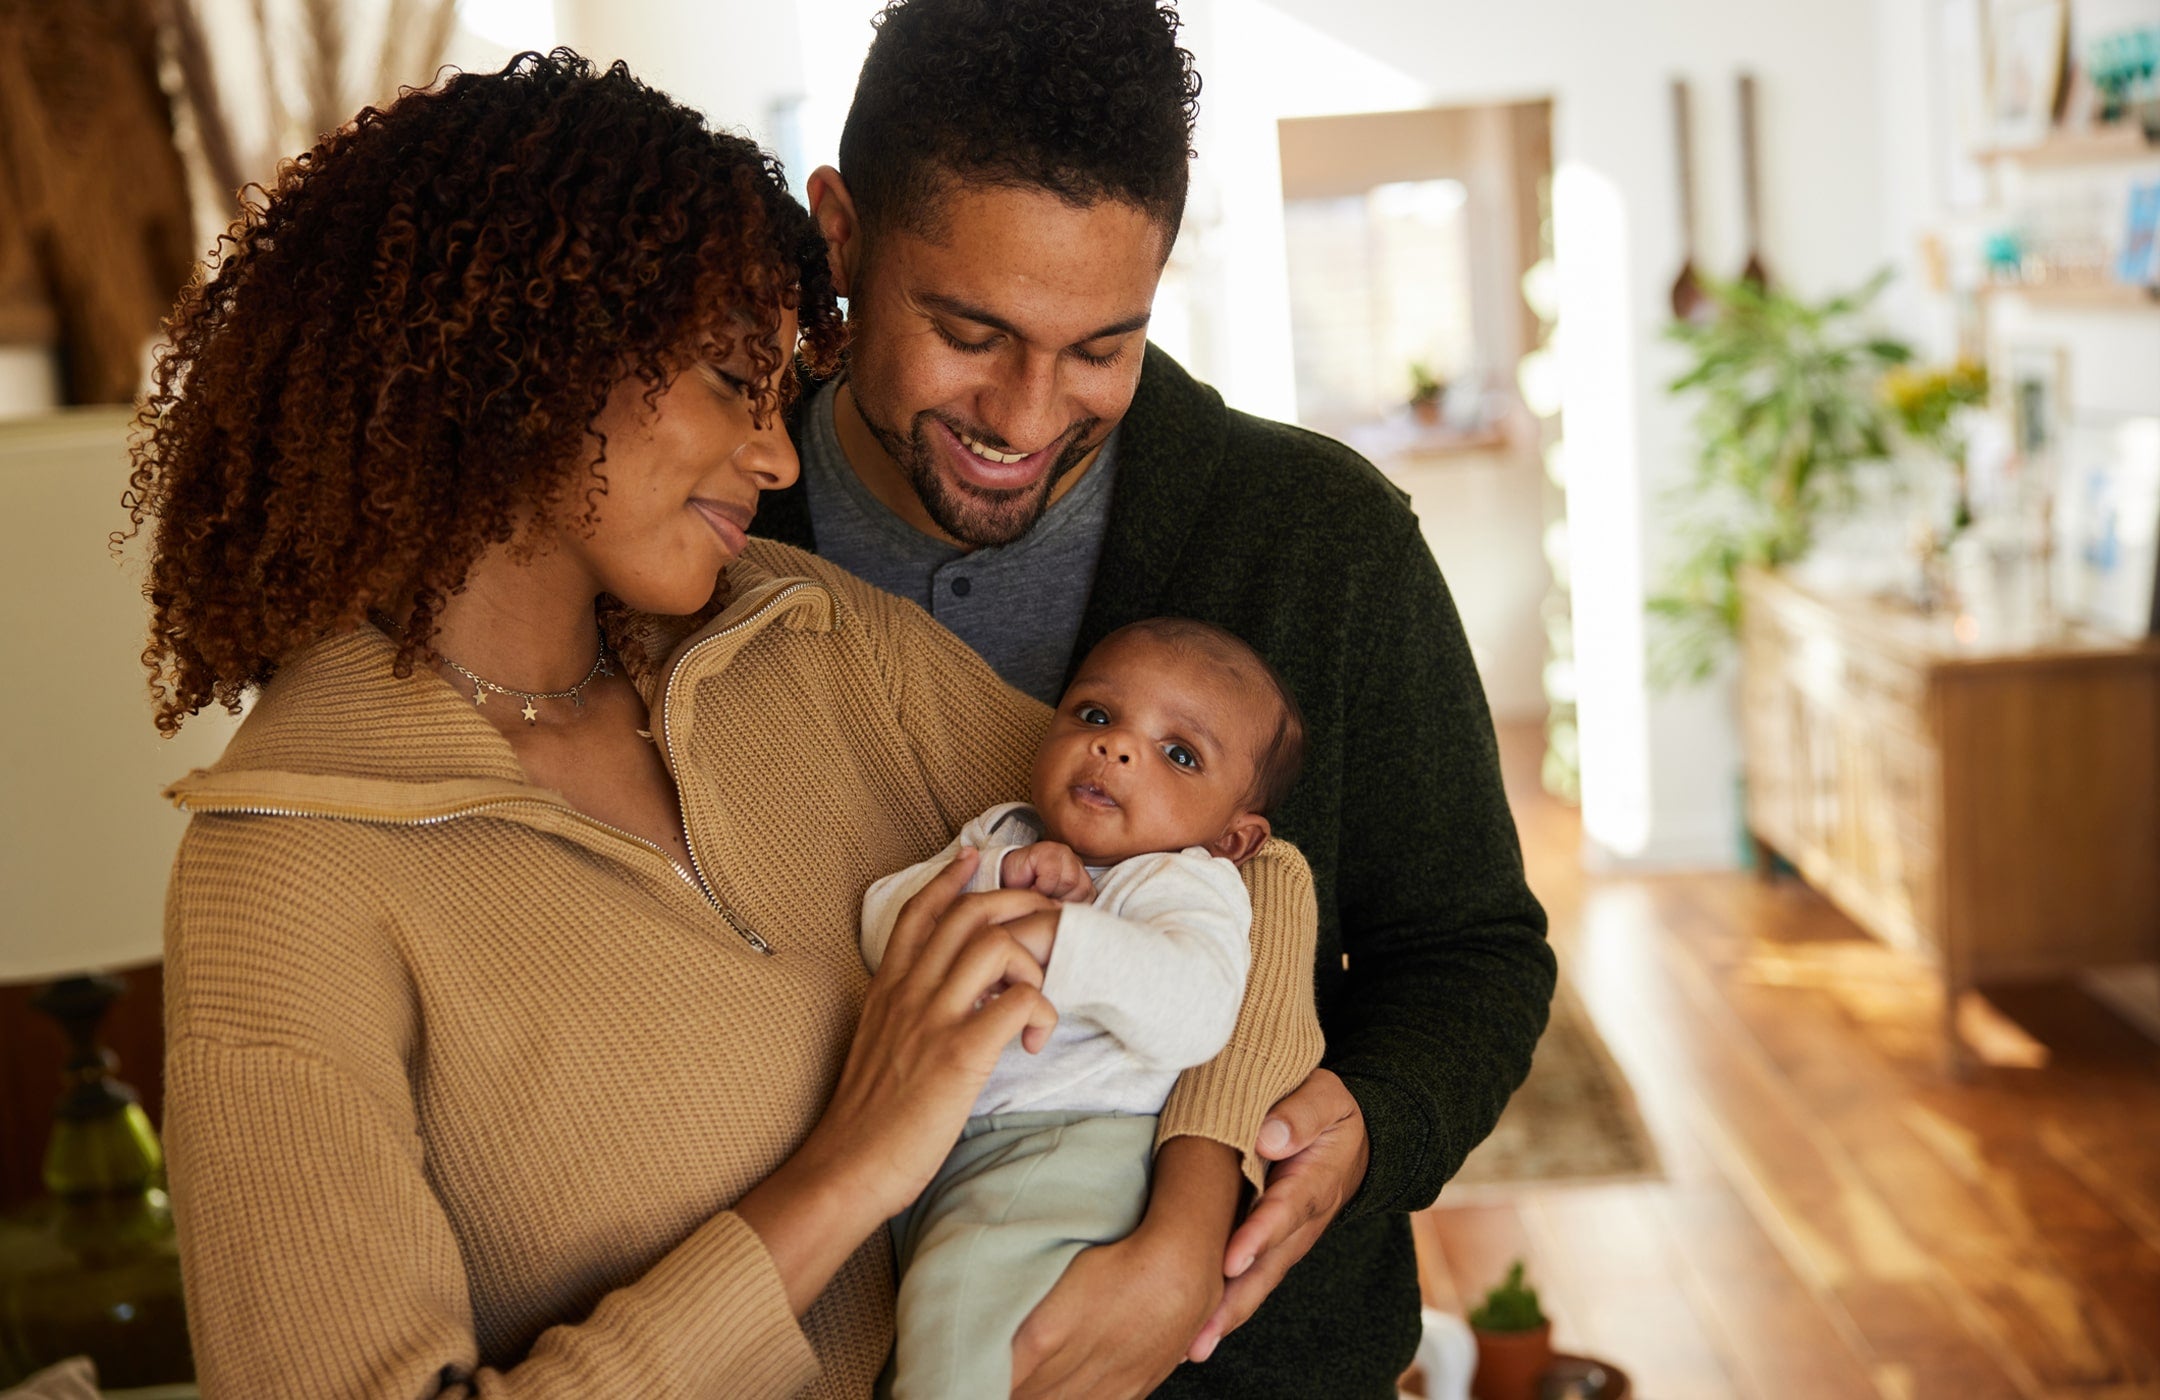 8 Thoughtful Ways to Support New Parents